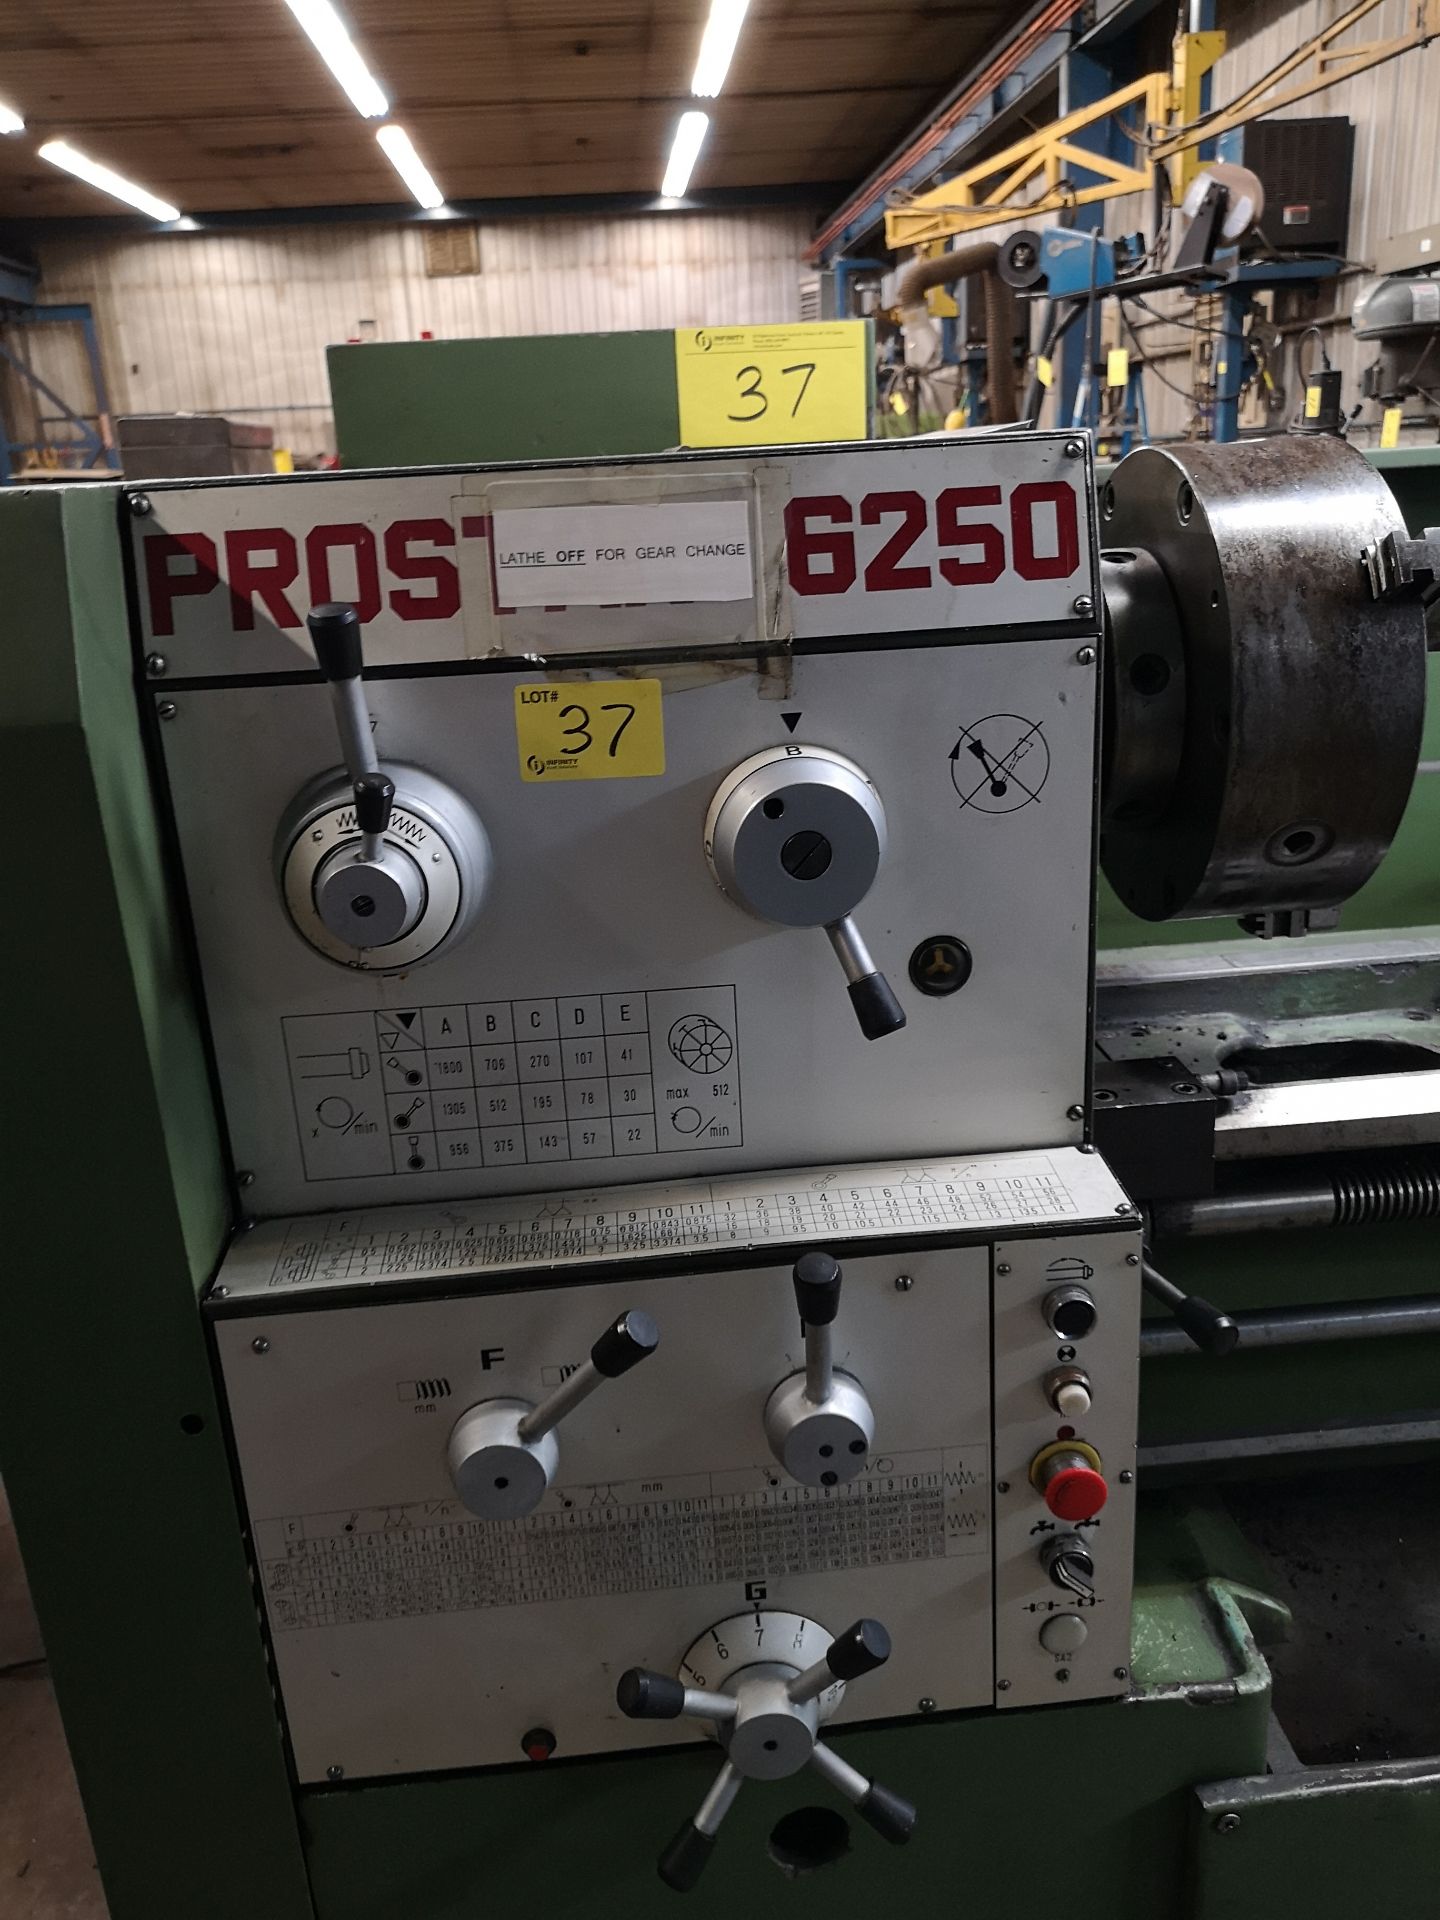 PROSTAR 6250 LATHE, 20" X 80", 12" 3-JAW CHUCK, 2.5" BORE, TAILSTOCK, STEADY REST, TOOL POST, SPEEDS - Image 8 of 10